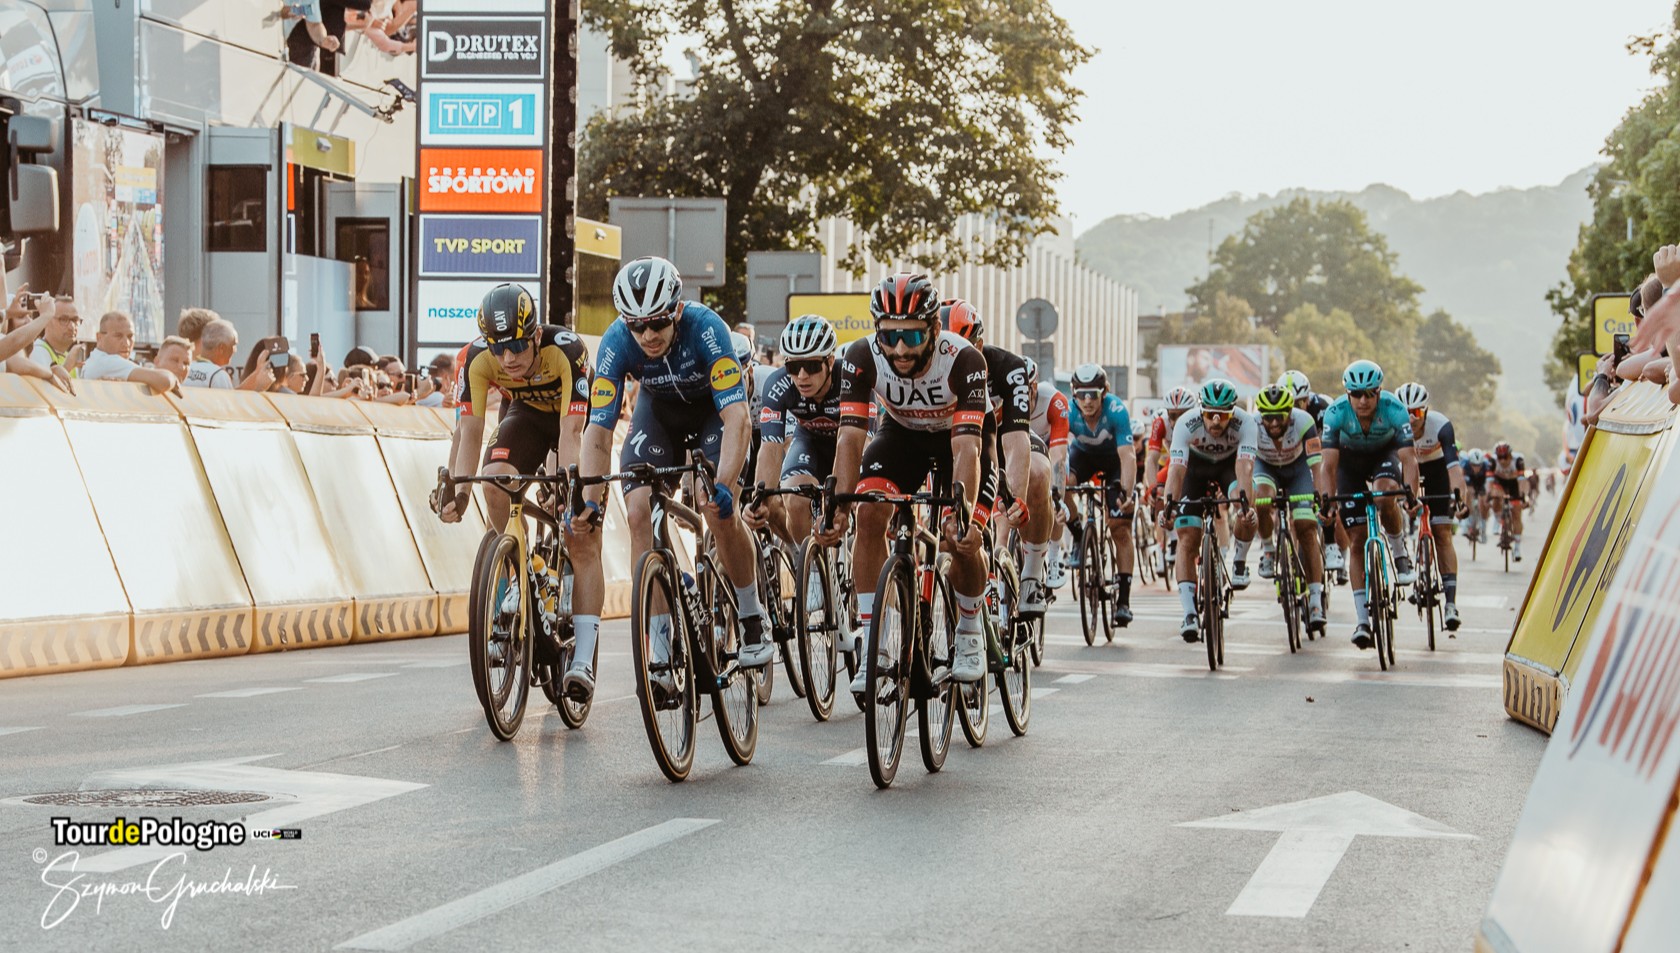 Tour de Pologne UCI WorldTour changed its route